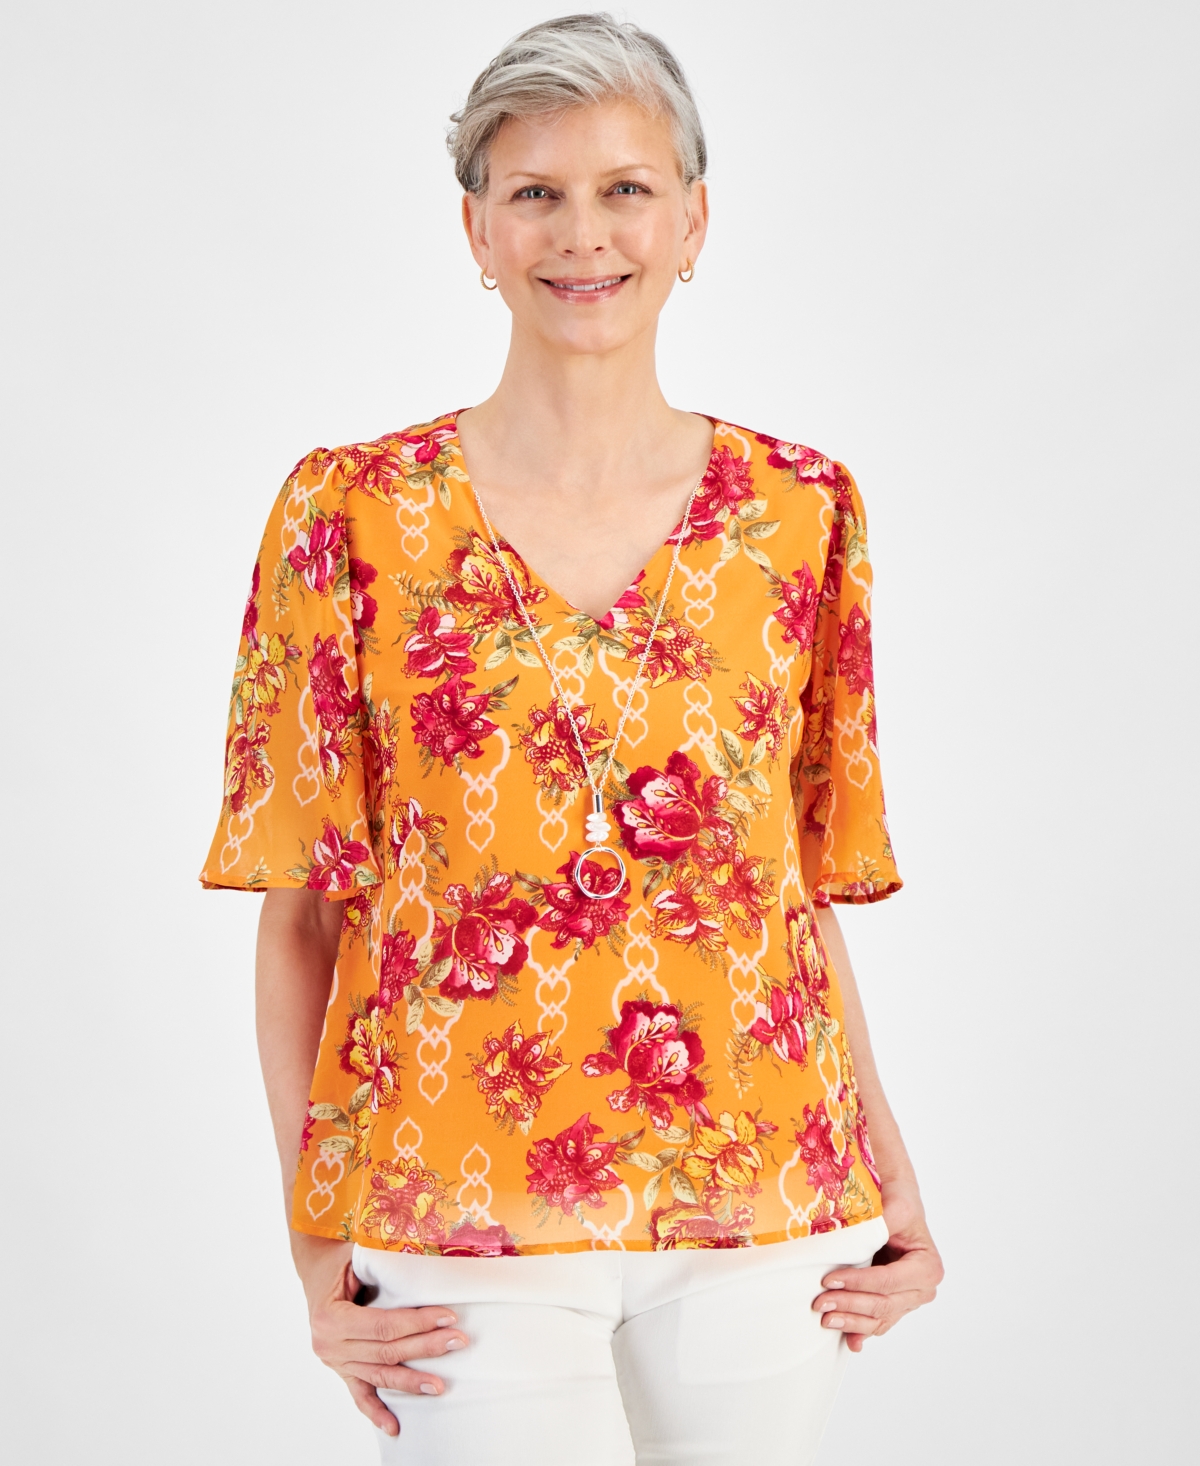 Women's Printed Elbow-Sleeve Necklace Top, Created for Macy's - Santa Fe Sun Combo